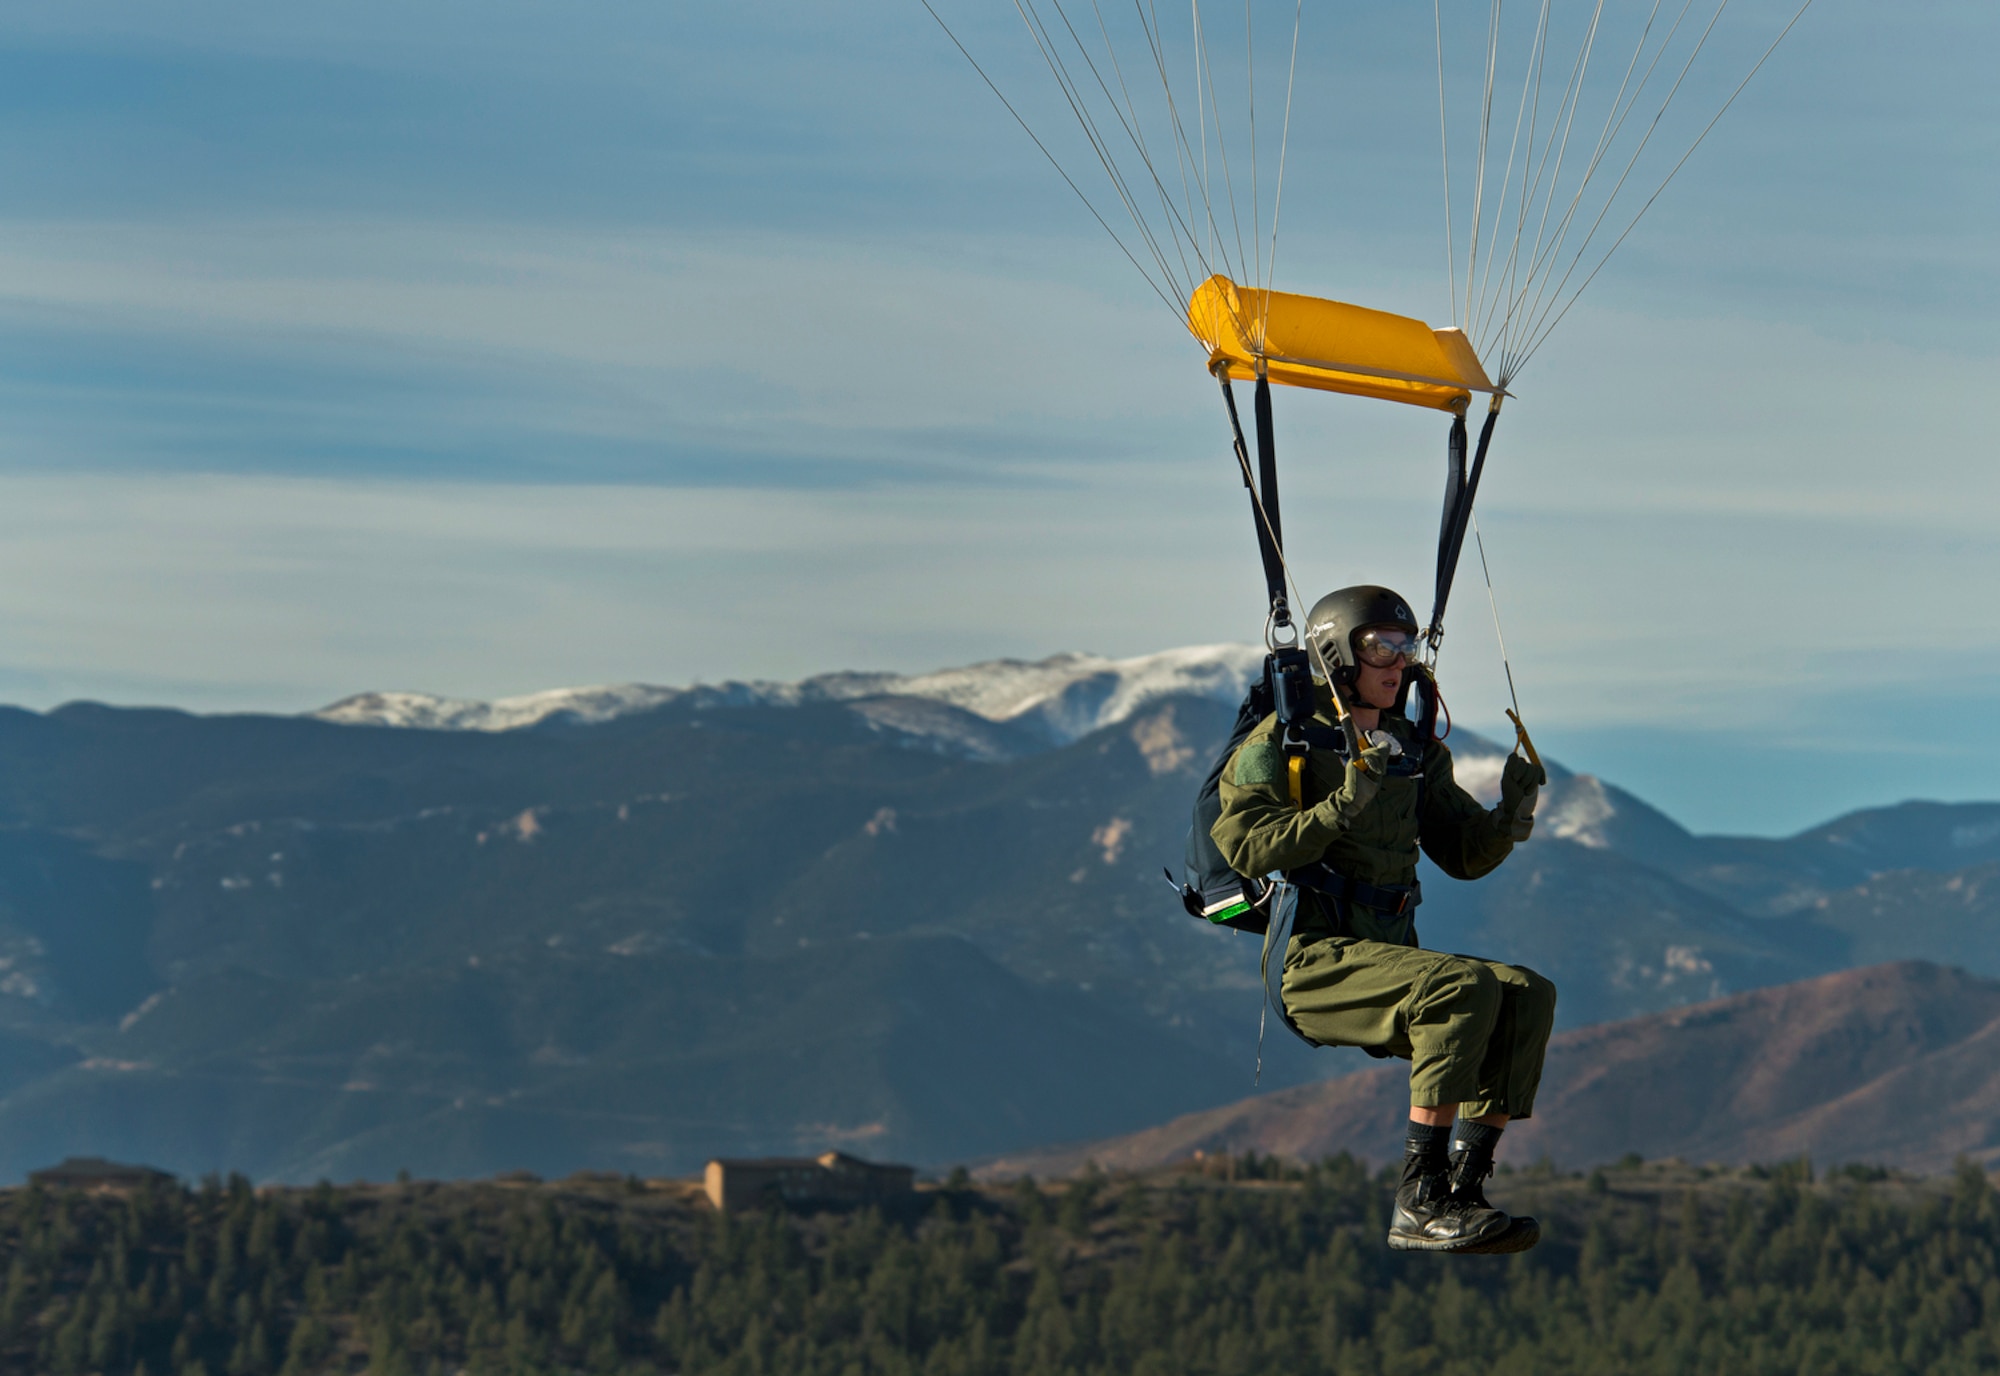 MidshipmanTaylor Vendetta, of the U.S. Navel Academy, prepares to land his first free-fall jump from the U.S. Air Force Academy's AM490 Basic Parachuting course. The AM490 students are taken to 4,500 feet and they stand in the door over Colorado Springs and the Rockie Mountains and jump. The course focuses on safety and emergency procedures to aid the students' ability to overcome their fears and perform under the extremely stressful and potentially life-threatening situations they may encounter.(U.S. Air Force photo/Tech. Sgt. Bennie J. Davis III)